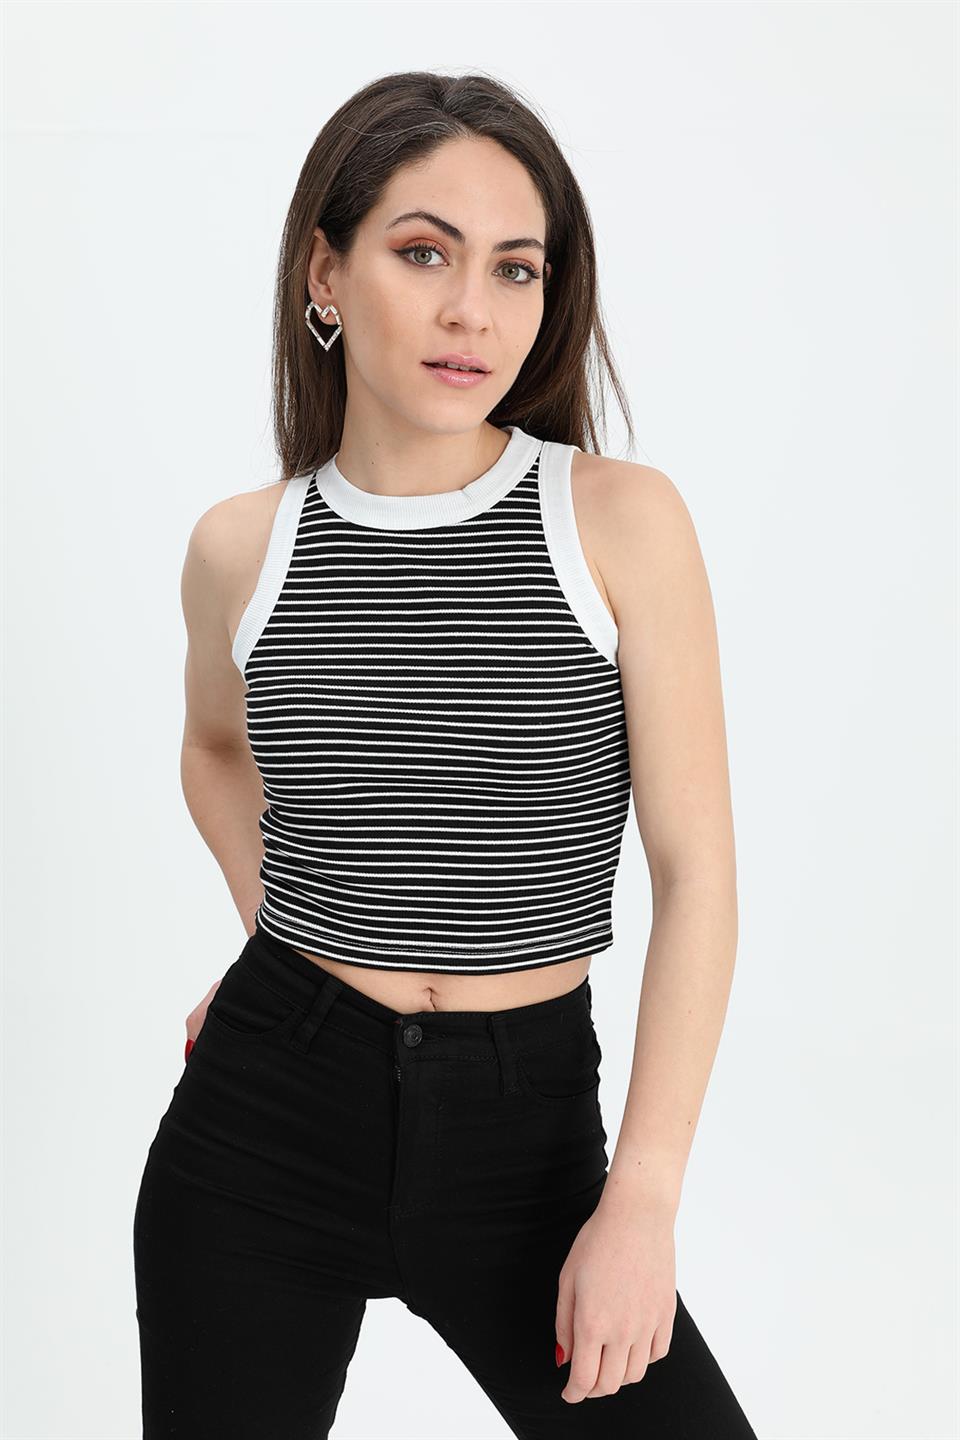 Women's Athlete Wide Pile Striped Camisole - Black - STREETMODE™